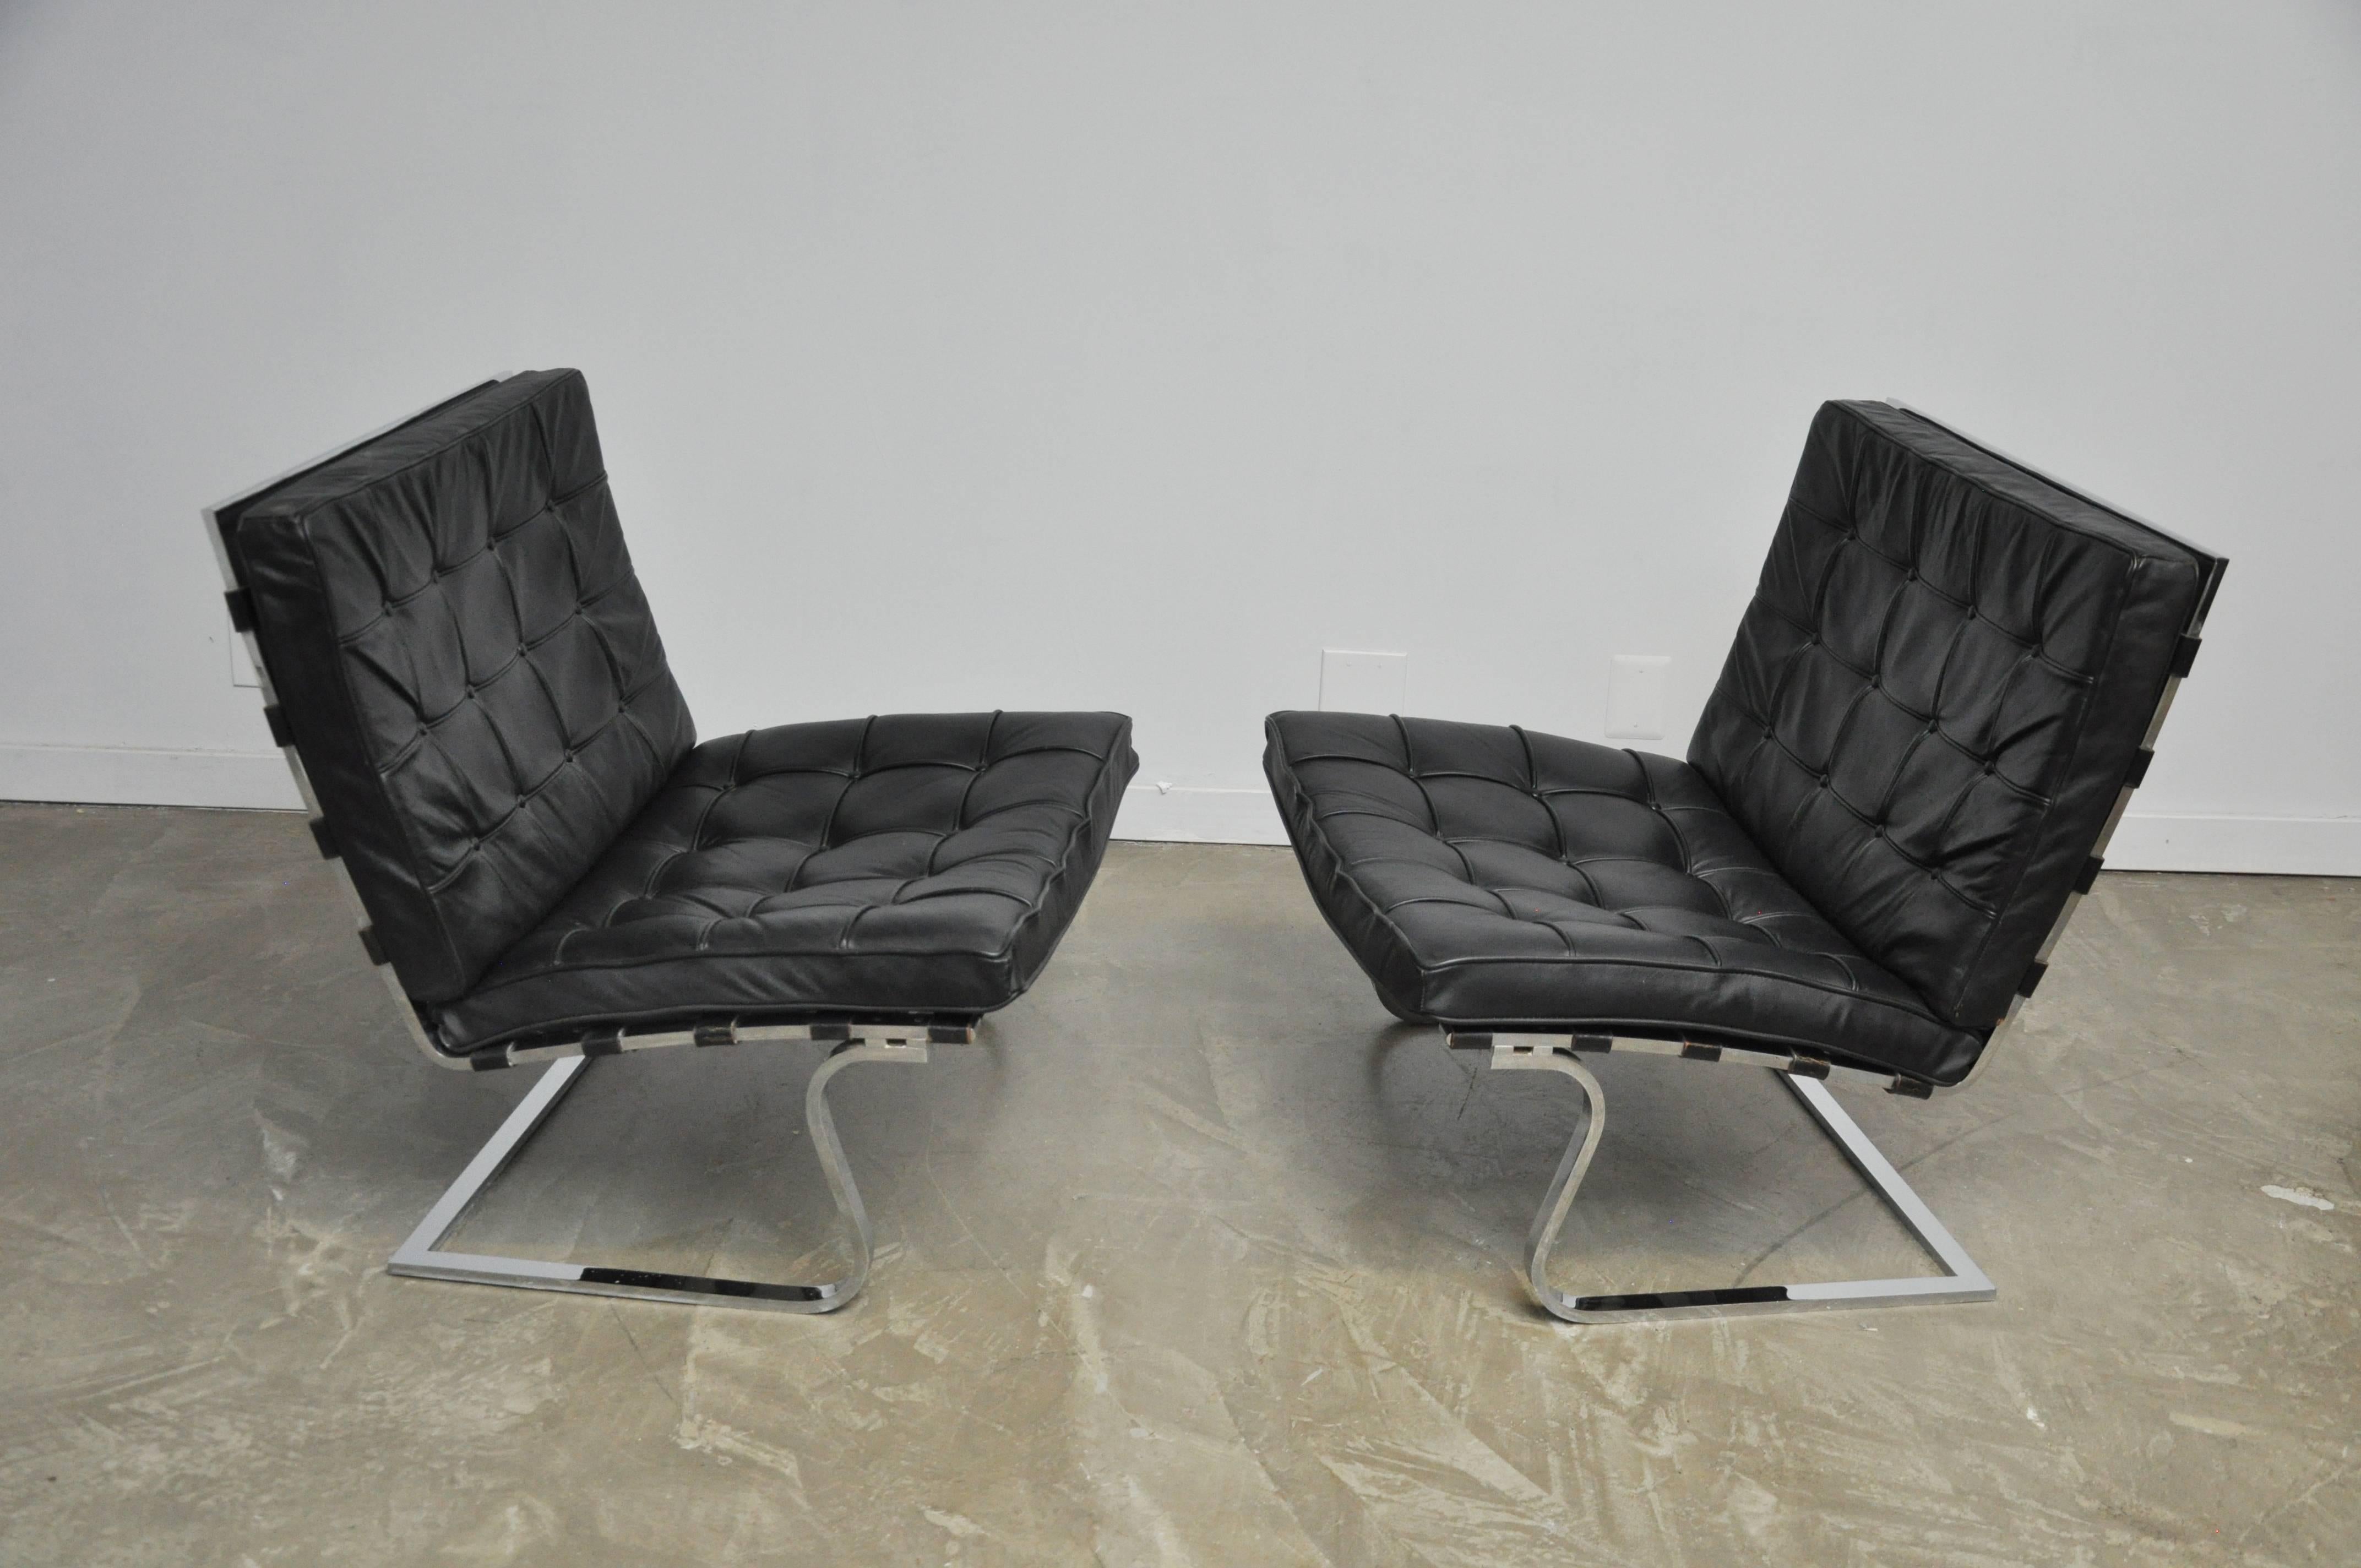 Original 1960s Tugendhat chairs for Knoll. Original receipt from 1960s, Germany included. Original leather and stainless steel frames.